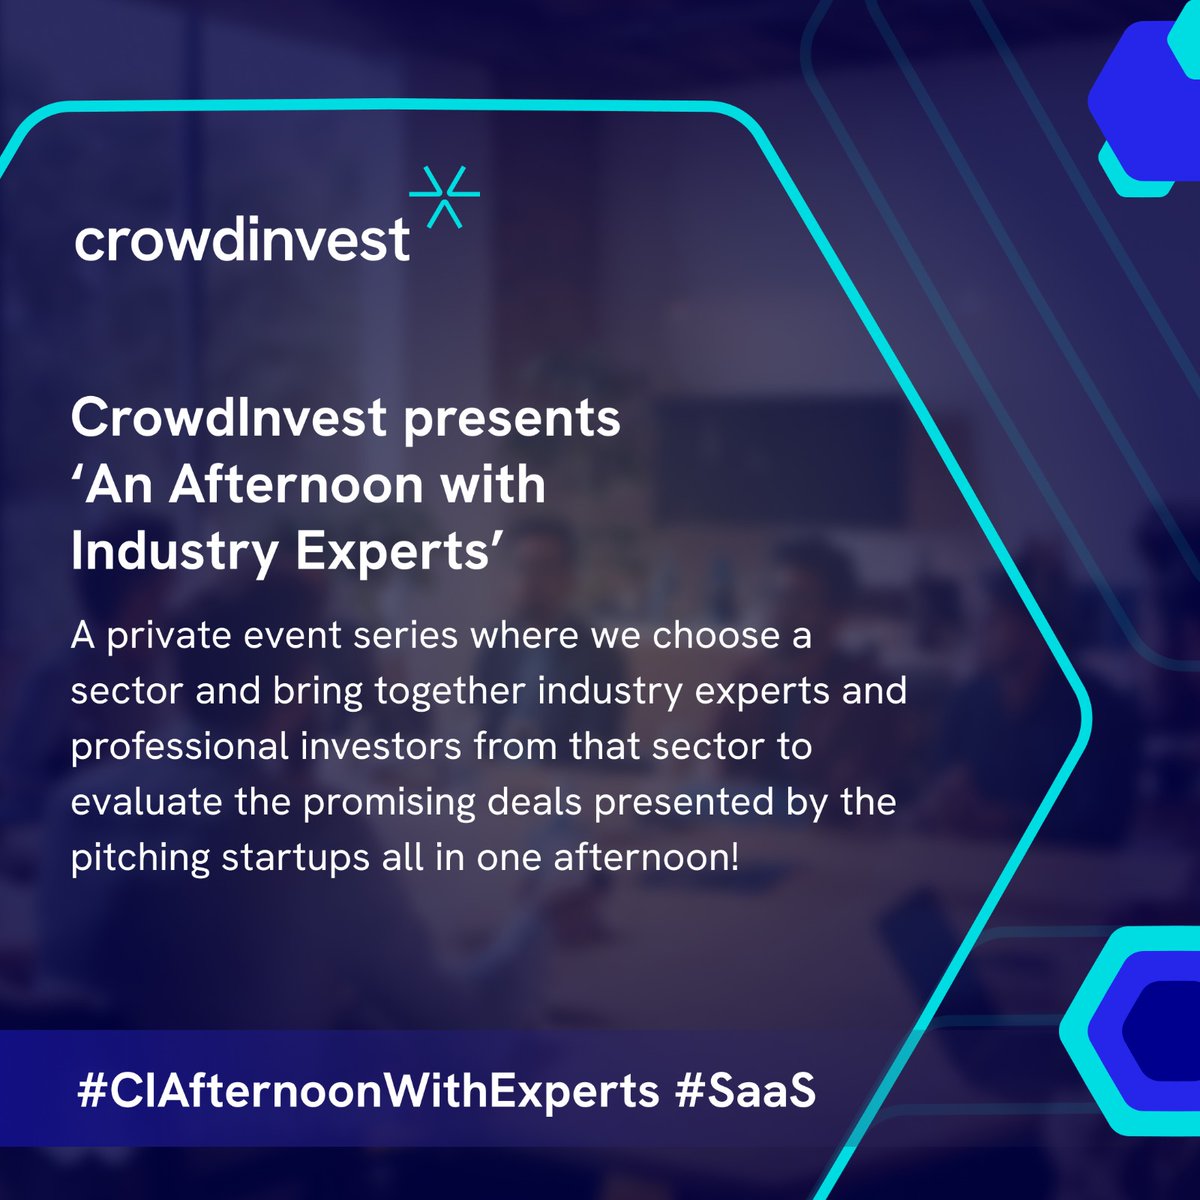 A private series designed to bring pre-vetted investment deals to investors & eliminate the need for them to check if the deal fits their investment criteria & help startups access multiple eligible international investors & gain valuable feedback #CIAfternoonWithExperts #SaaS